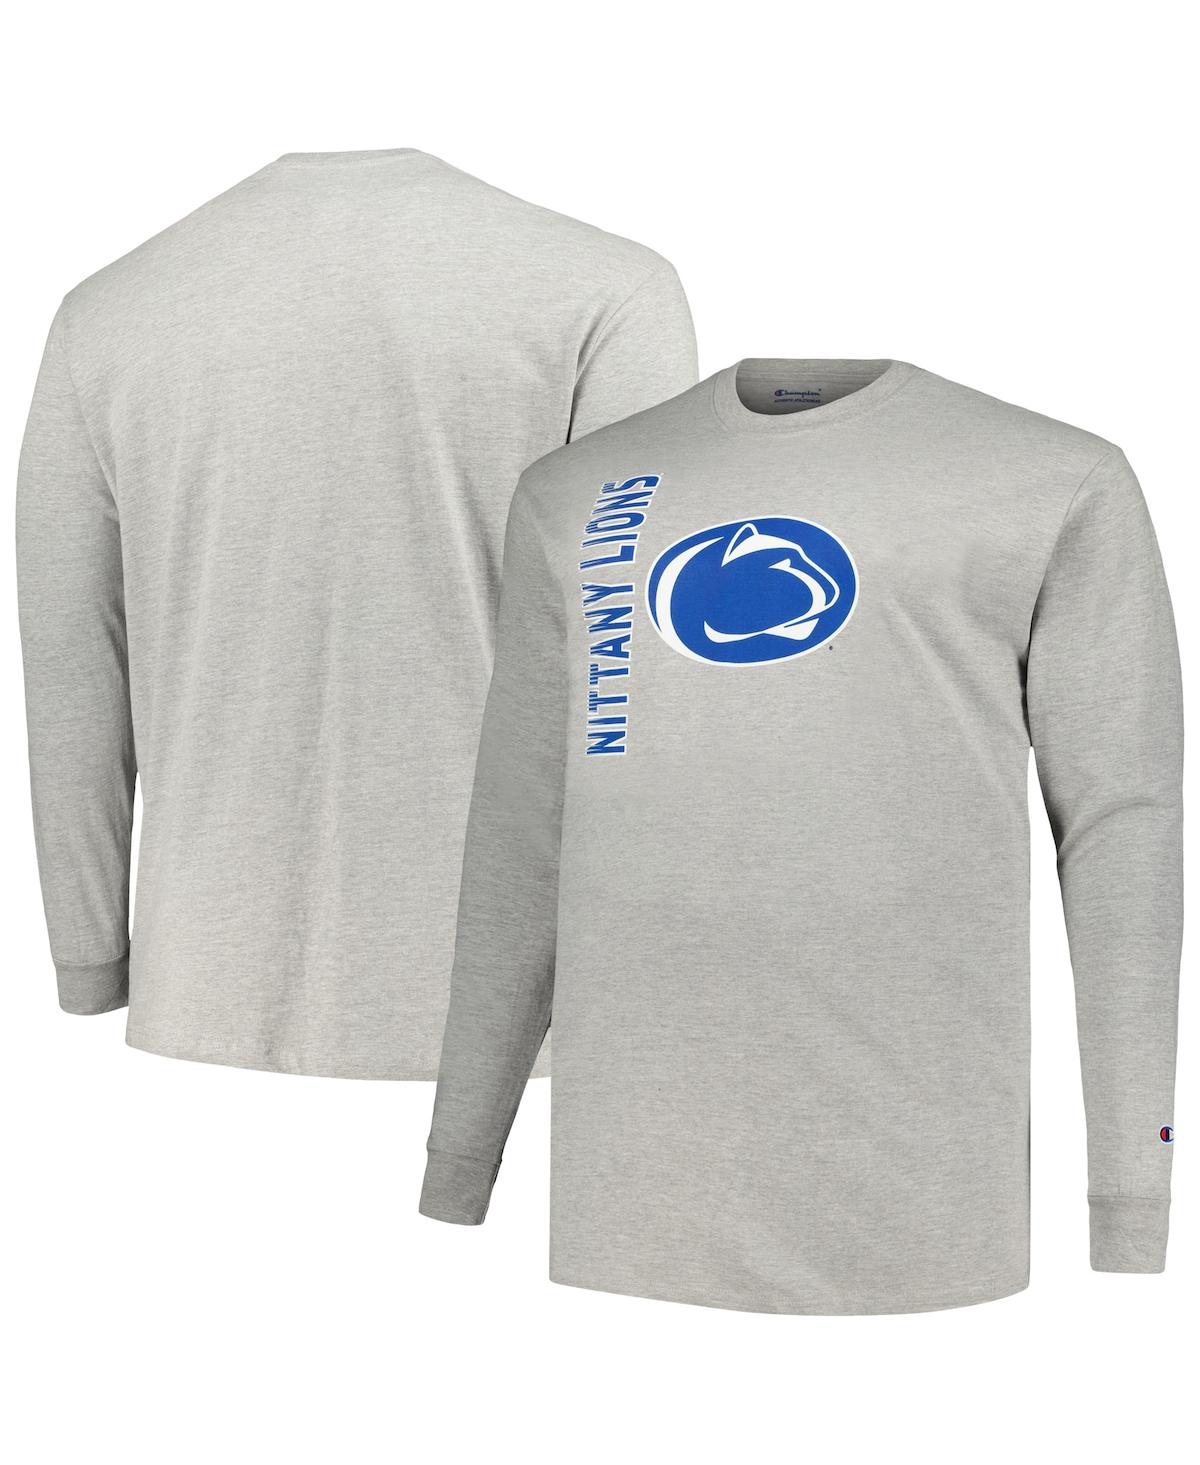 Champion Men's  Heather Gray Penn State Nittany Lions Big And Tall Mascot Long Sleeve T-shirt